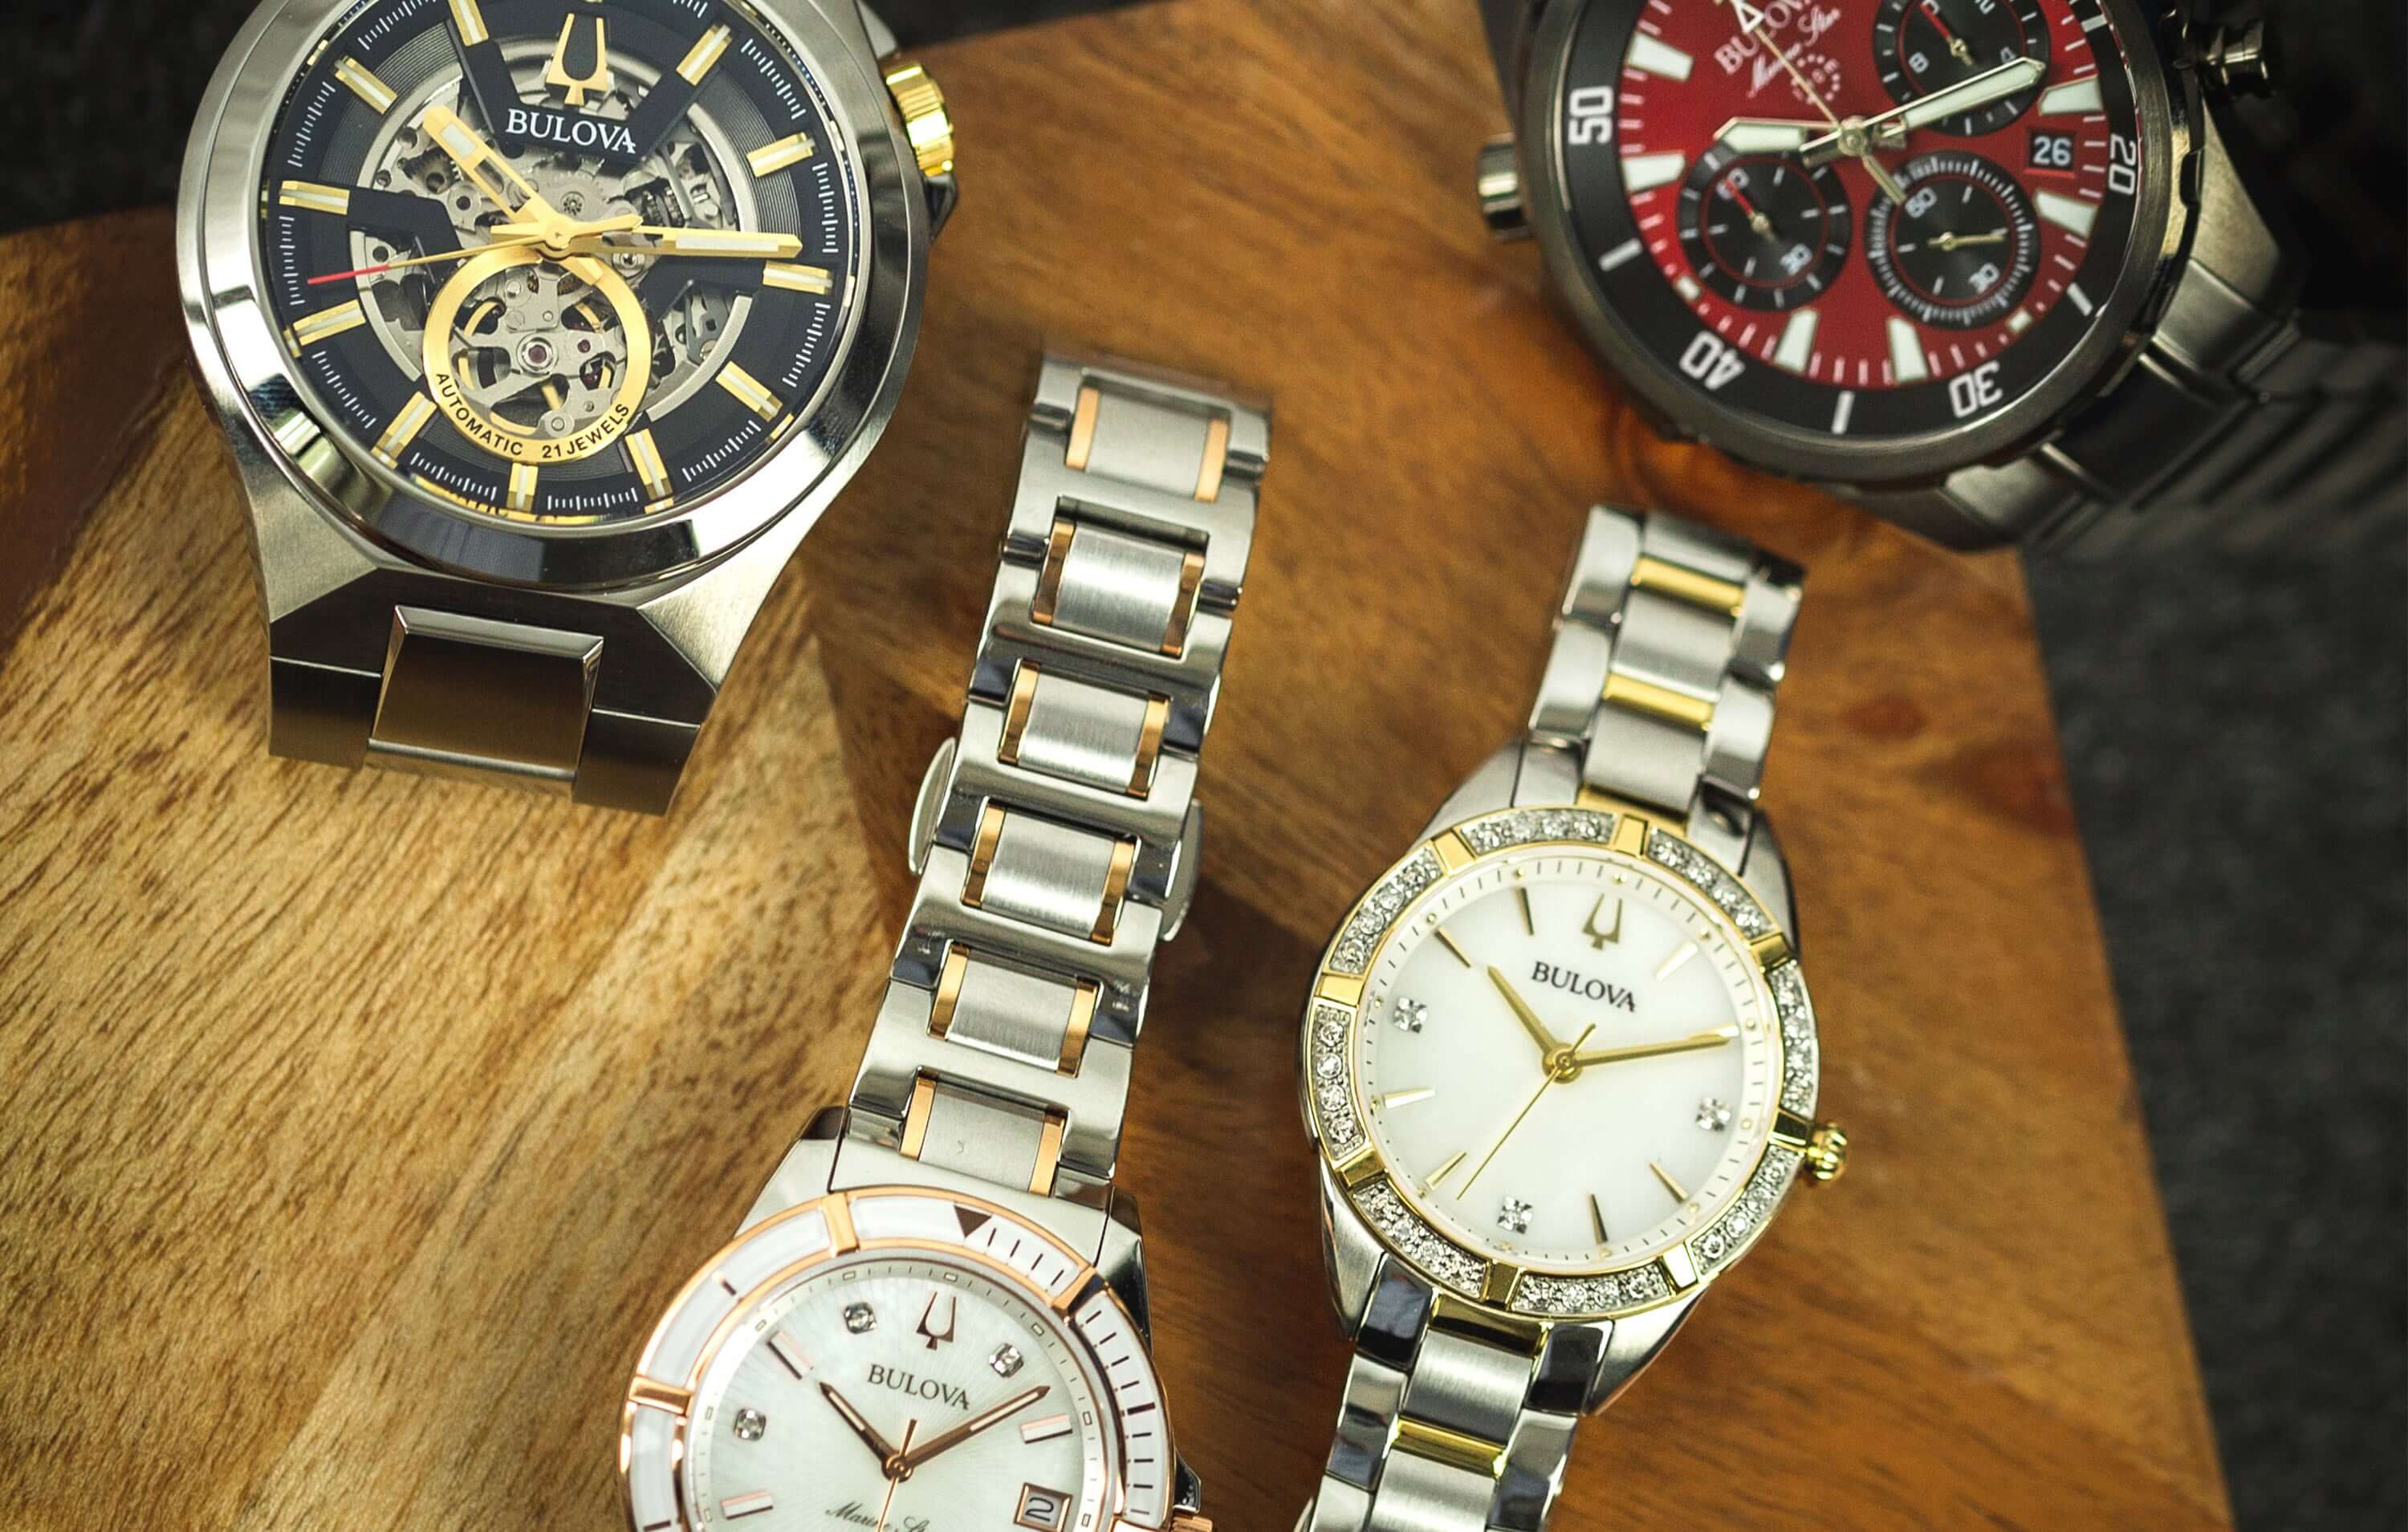 Are Water Resistant Watches Waterproof?